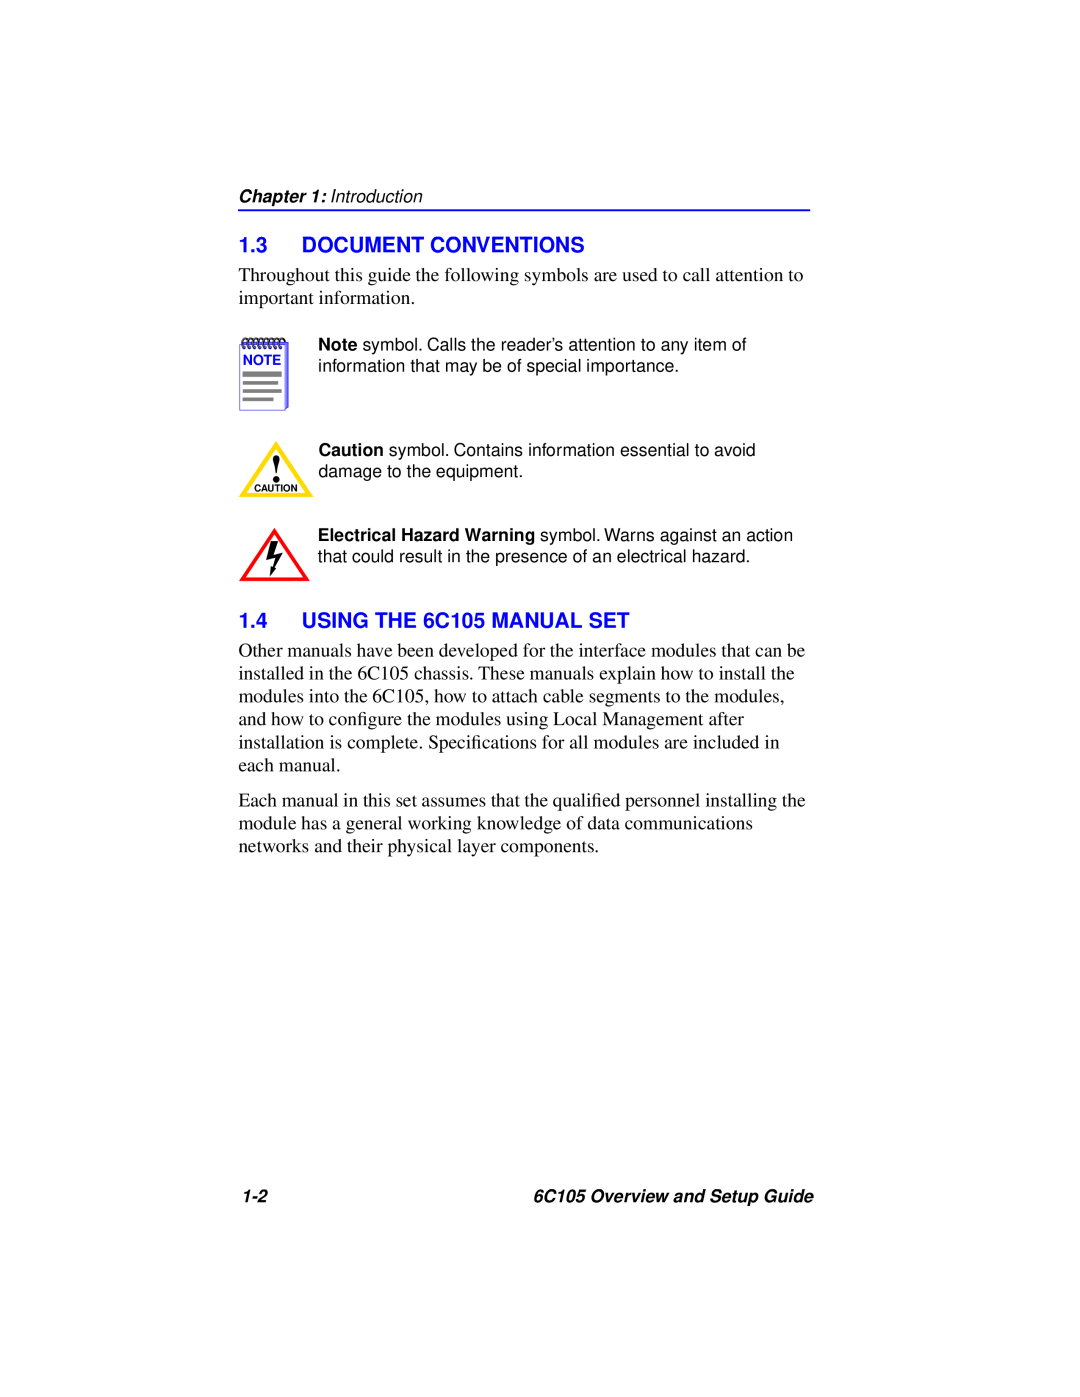 Cabletron Systems setup guide Document Conventions, USING THE 6C105 MANUAL SET, Introduction 